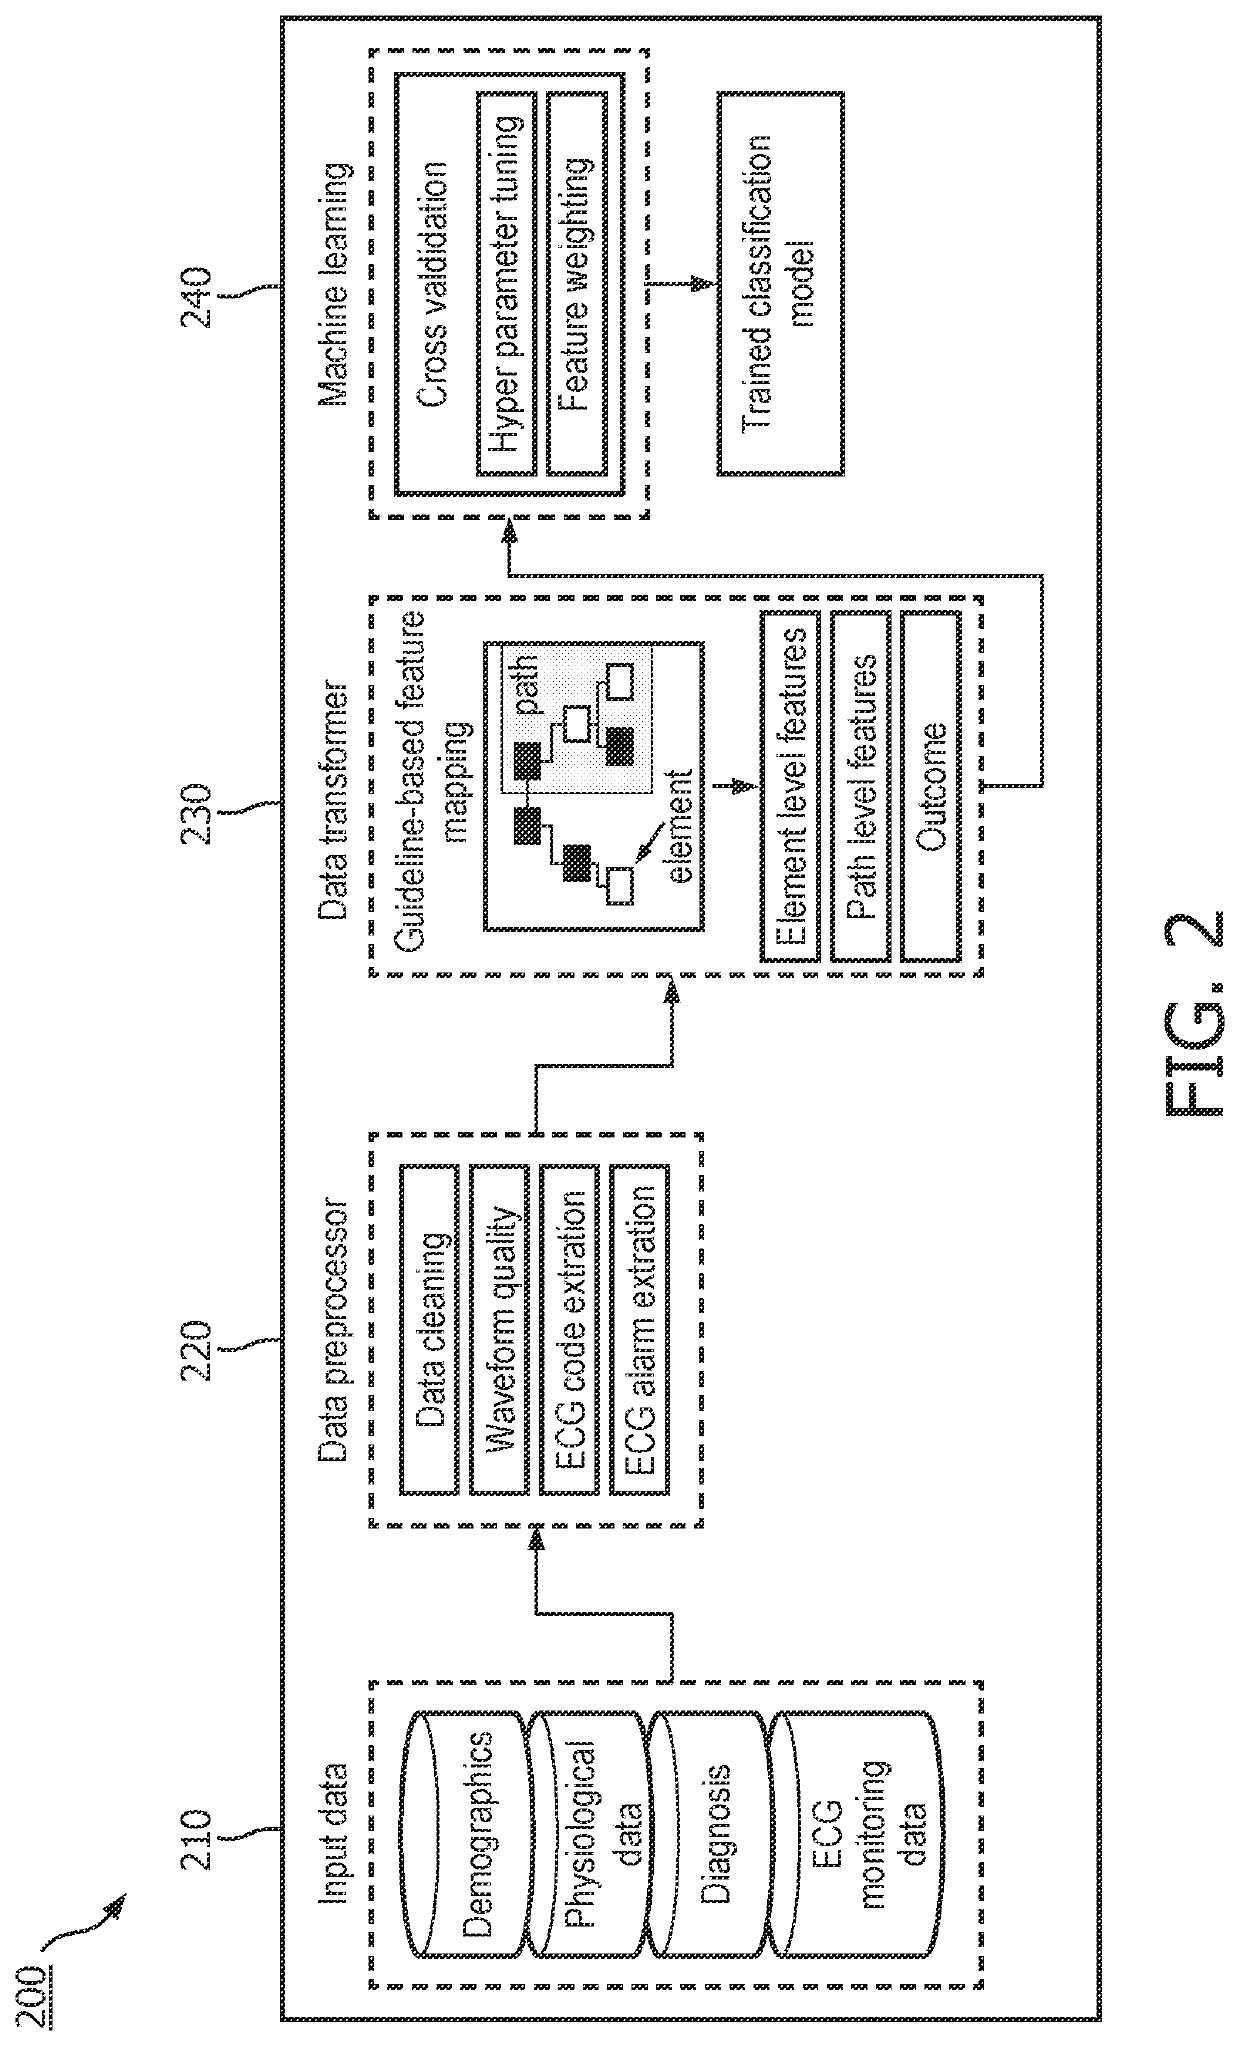 System and method for identifying low clinical value telemetry cases